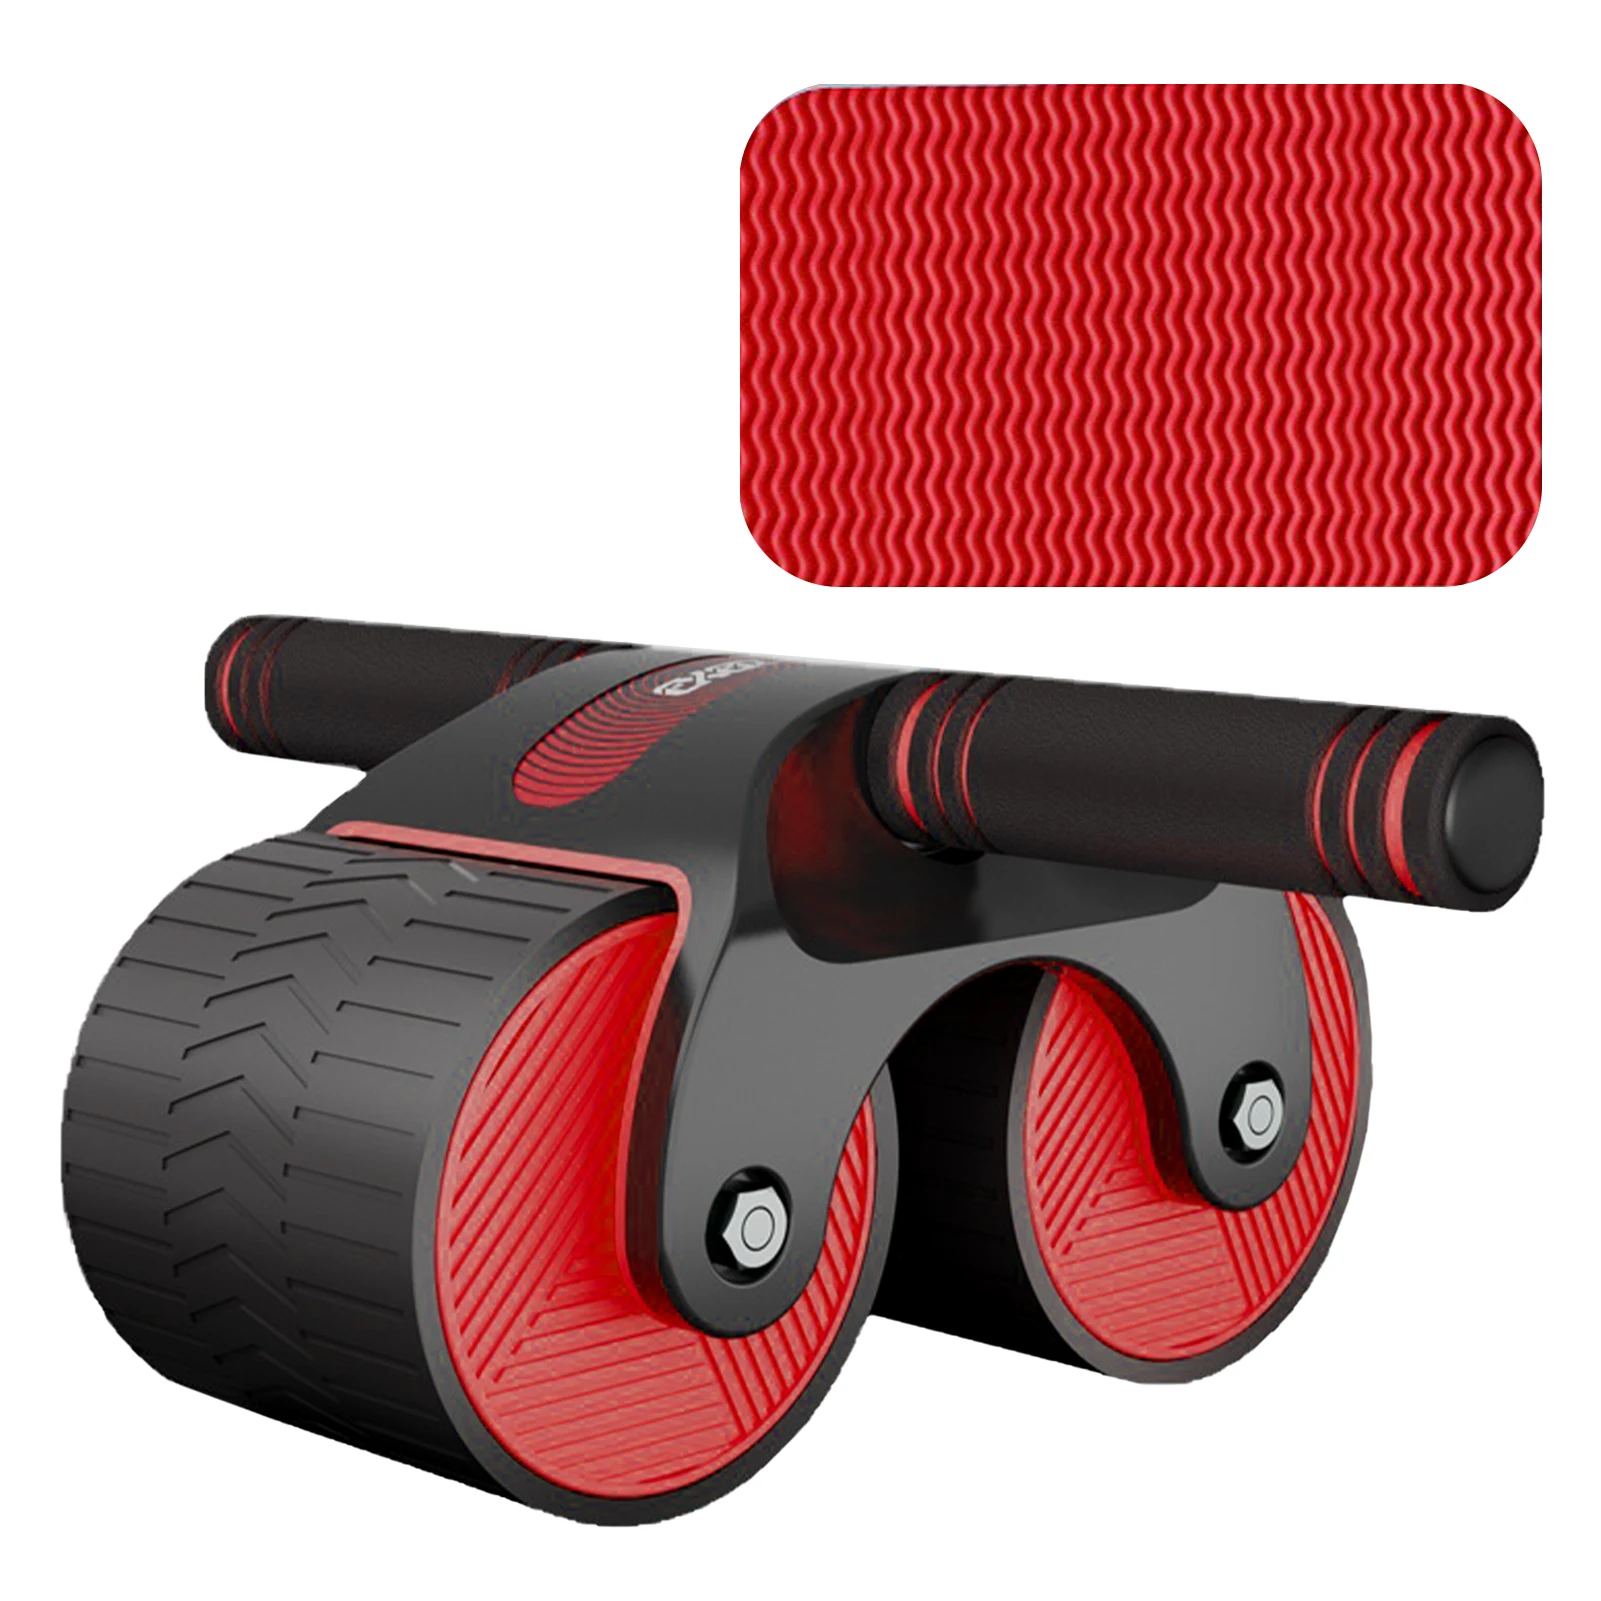 

Automatic Rebound Domestic Double Home Abdominal Exerciser Strength Training Ab Roller Wheel Fitness Core Workouts Gym Equipment